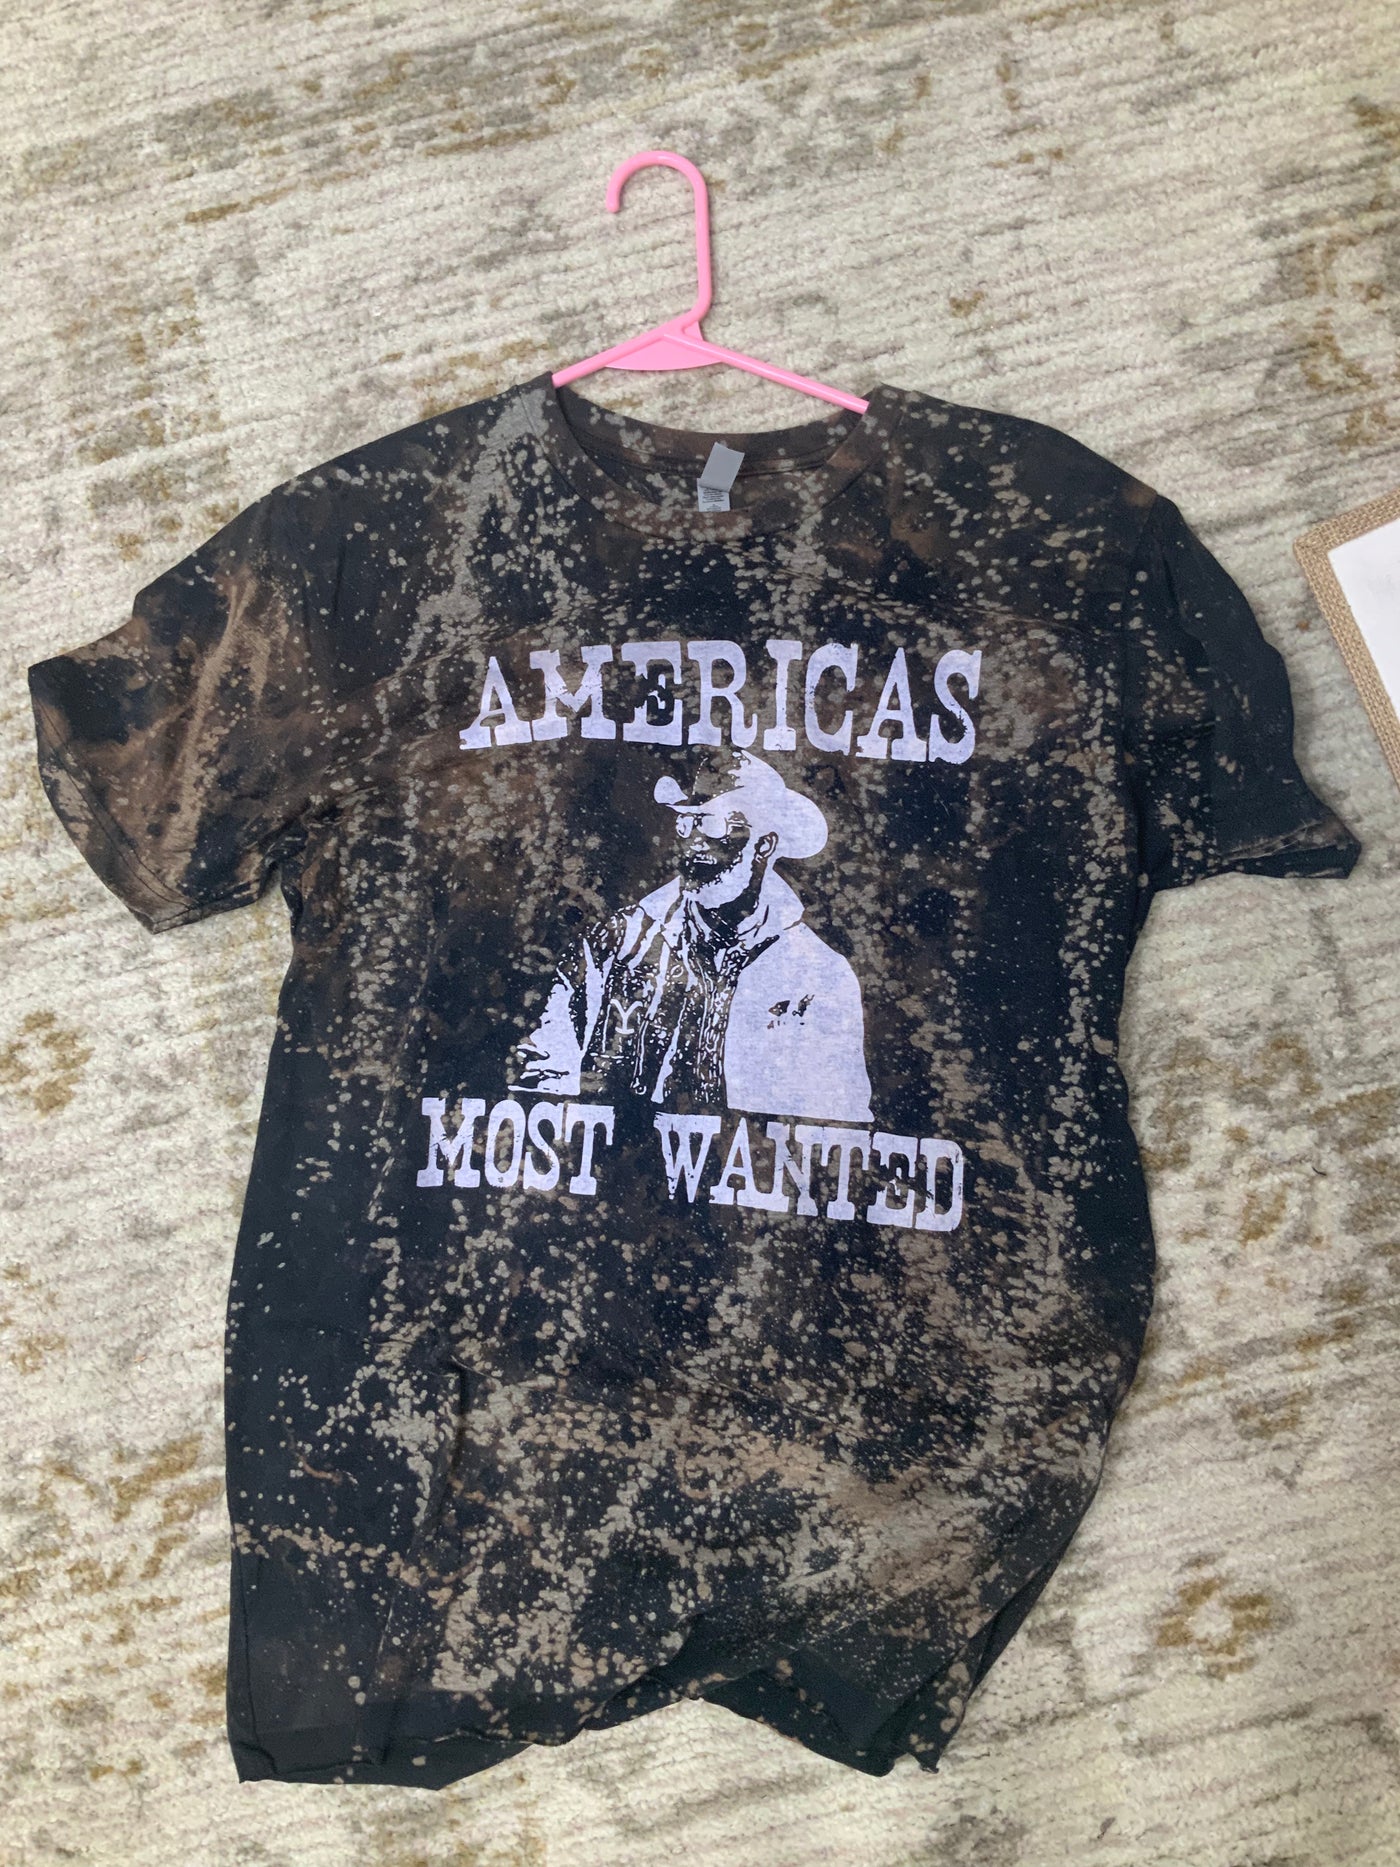 Black Bleach Dyed shirt. Graphic says Americas most wanted with a photo of Rip from Yellowstone in brown.